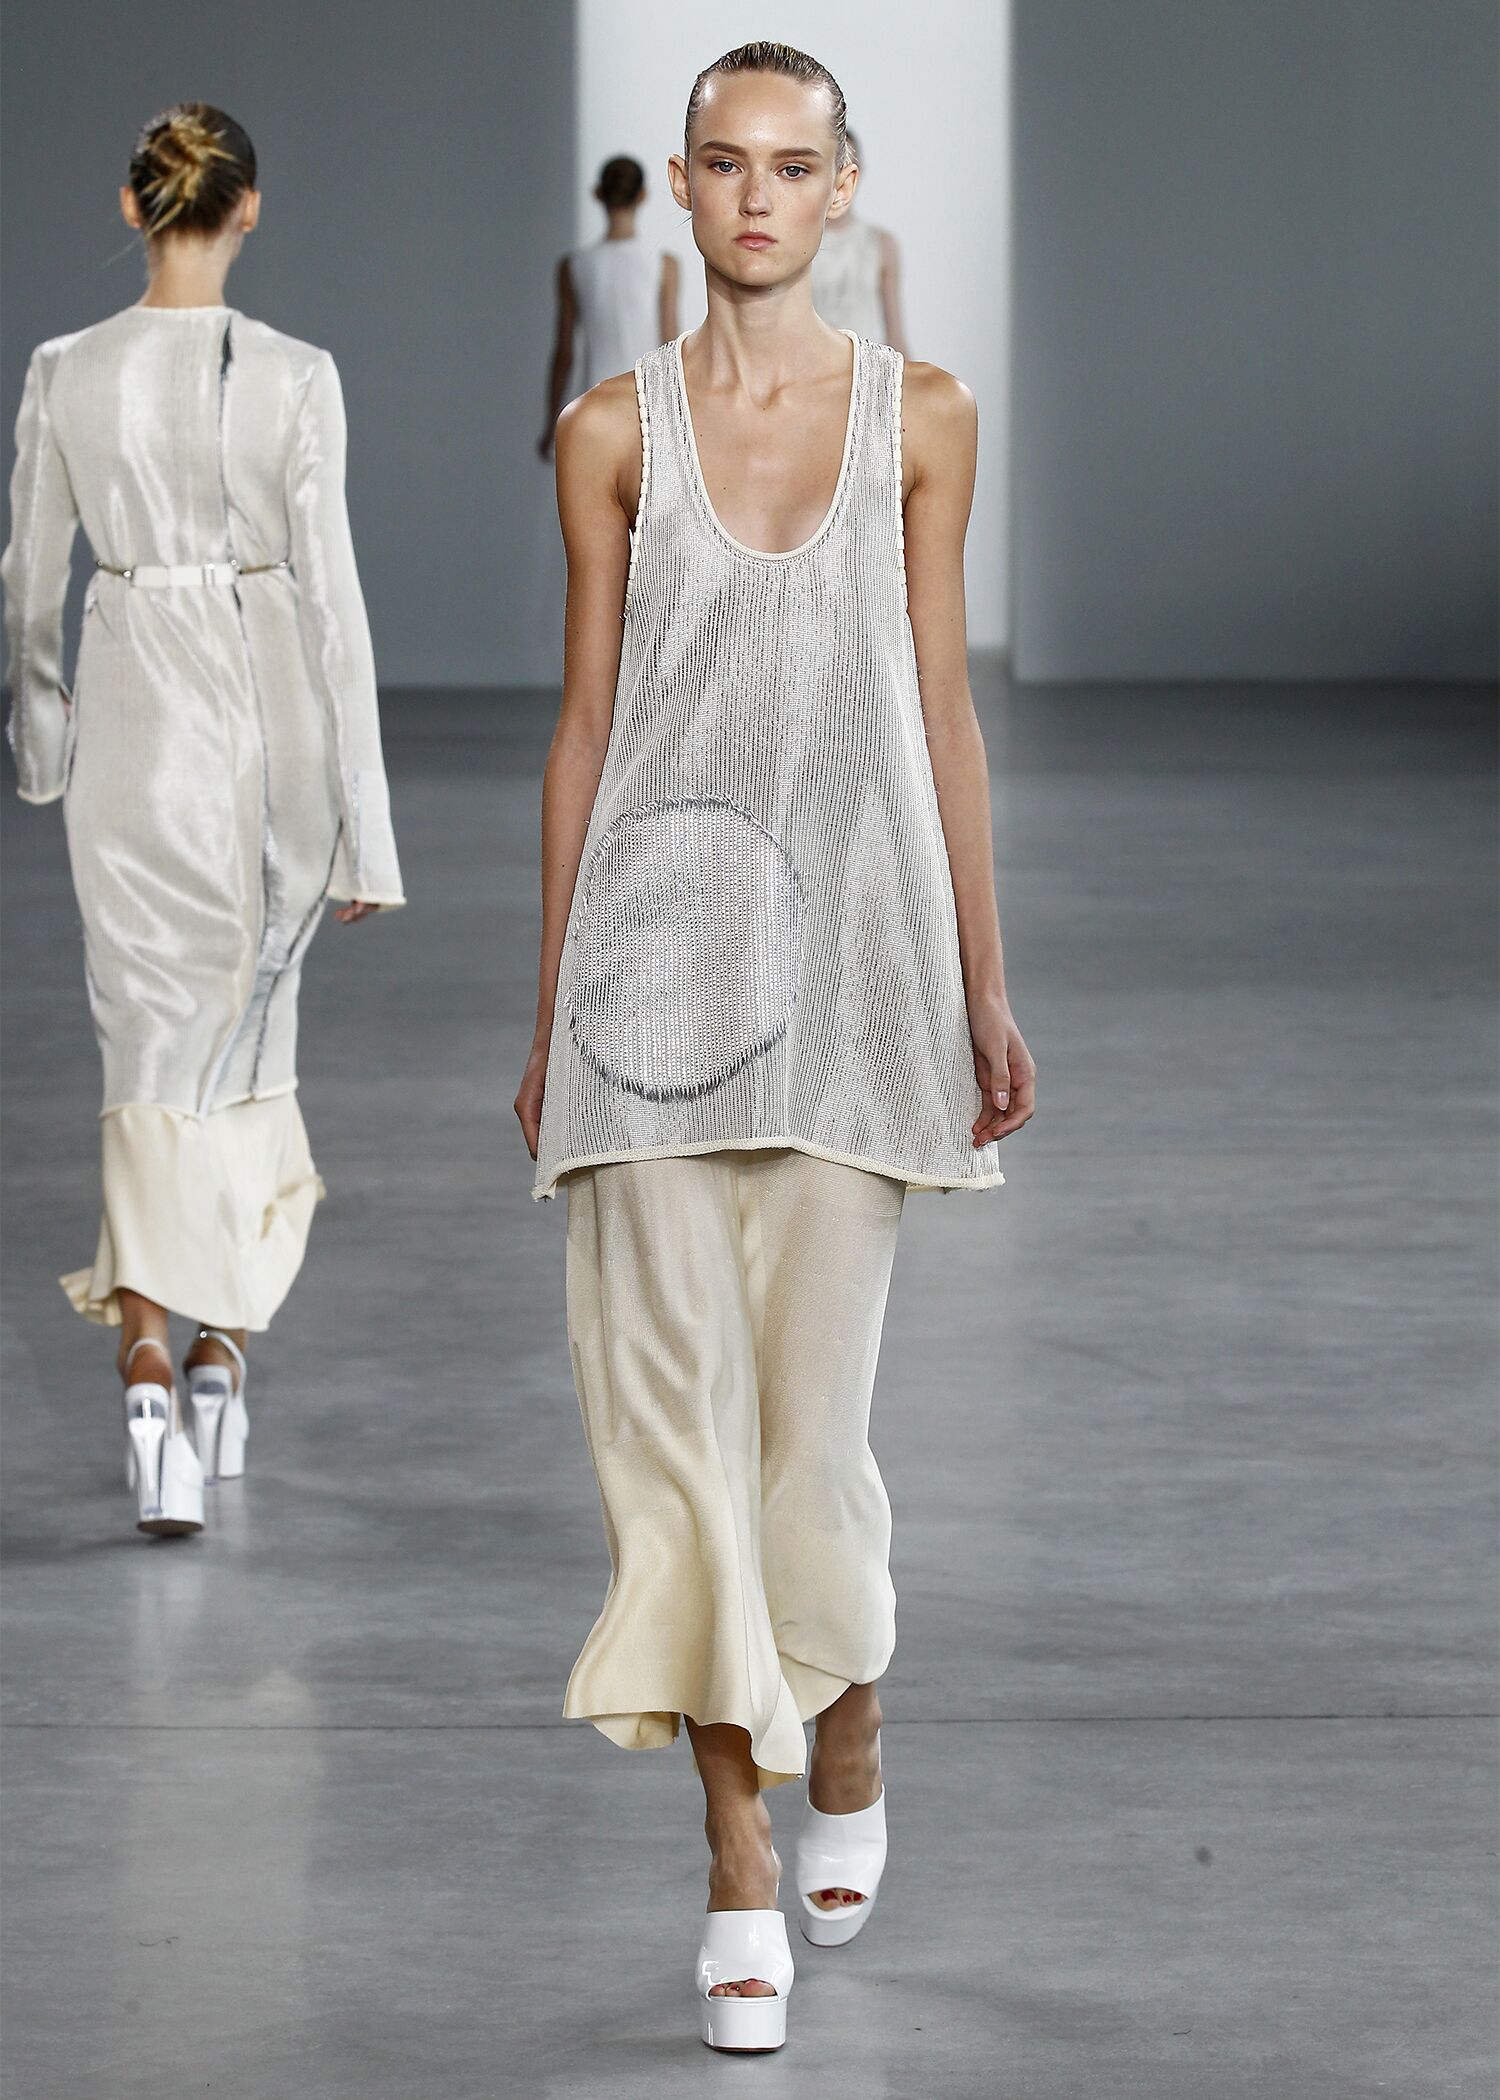 CALVIN KLEIN COLLECTION SPRING 2015 WOMEN'S COLLECTION | The Skinny Beep